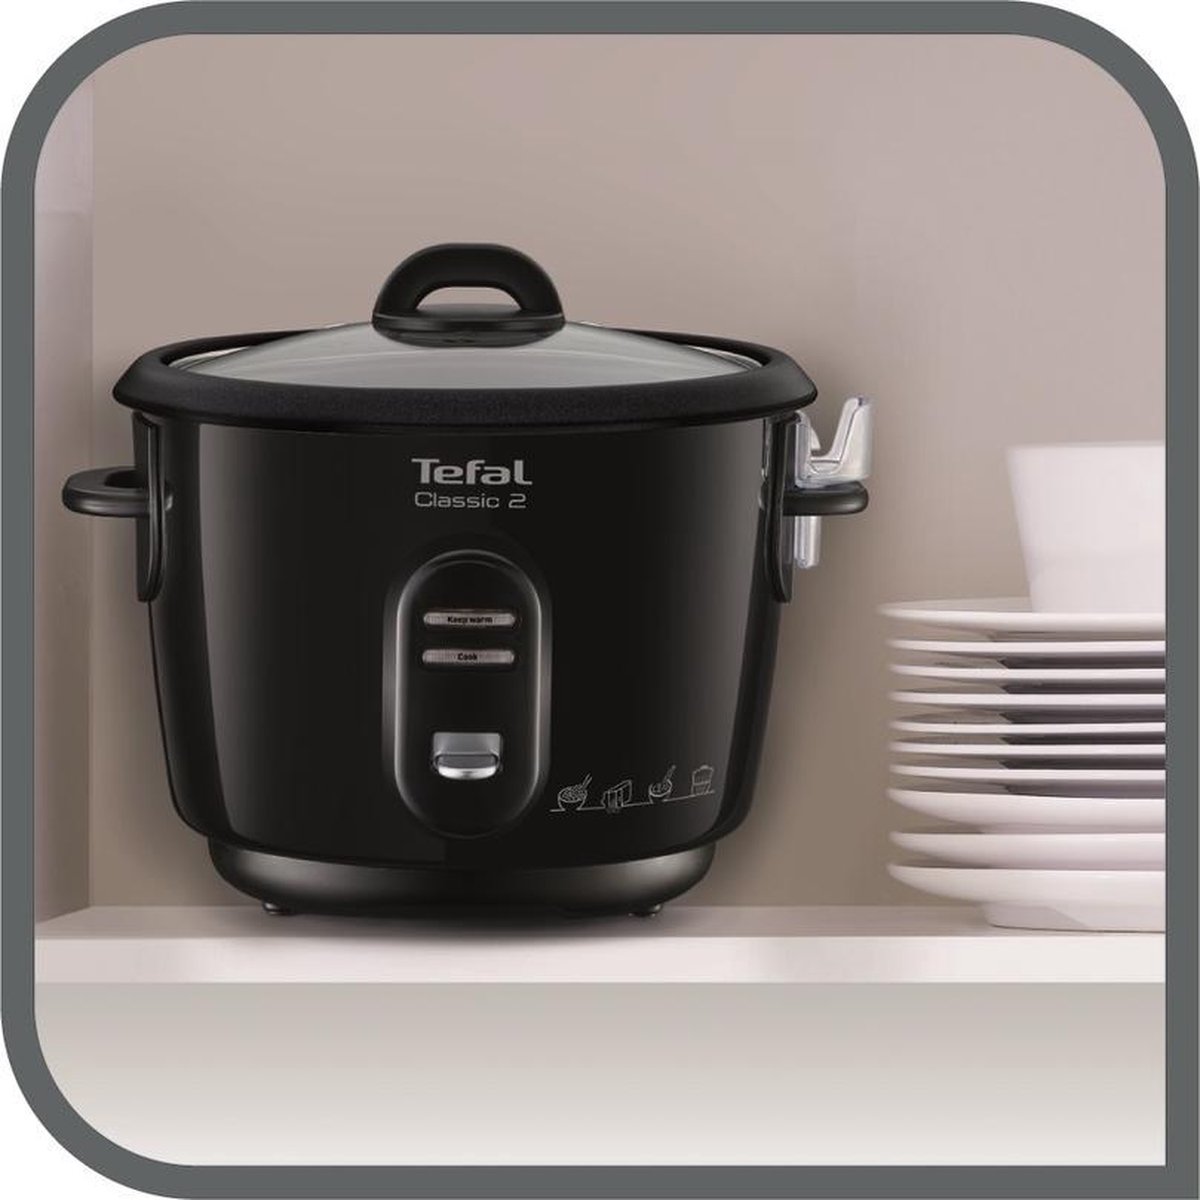 tefal classic 2 rice cooker Hot Sale - OFF 57%